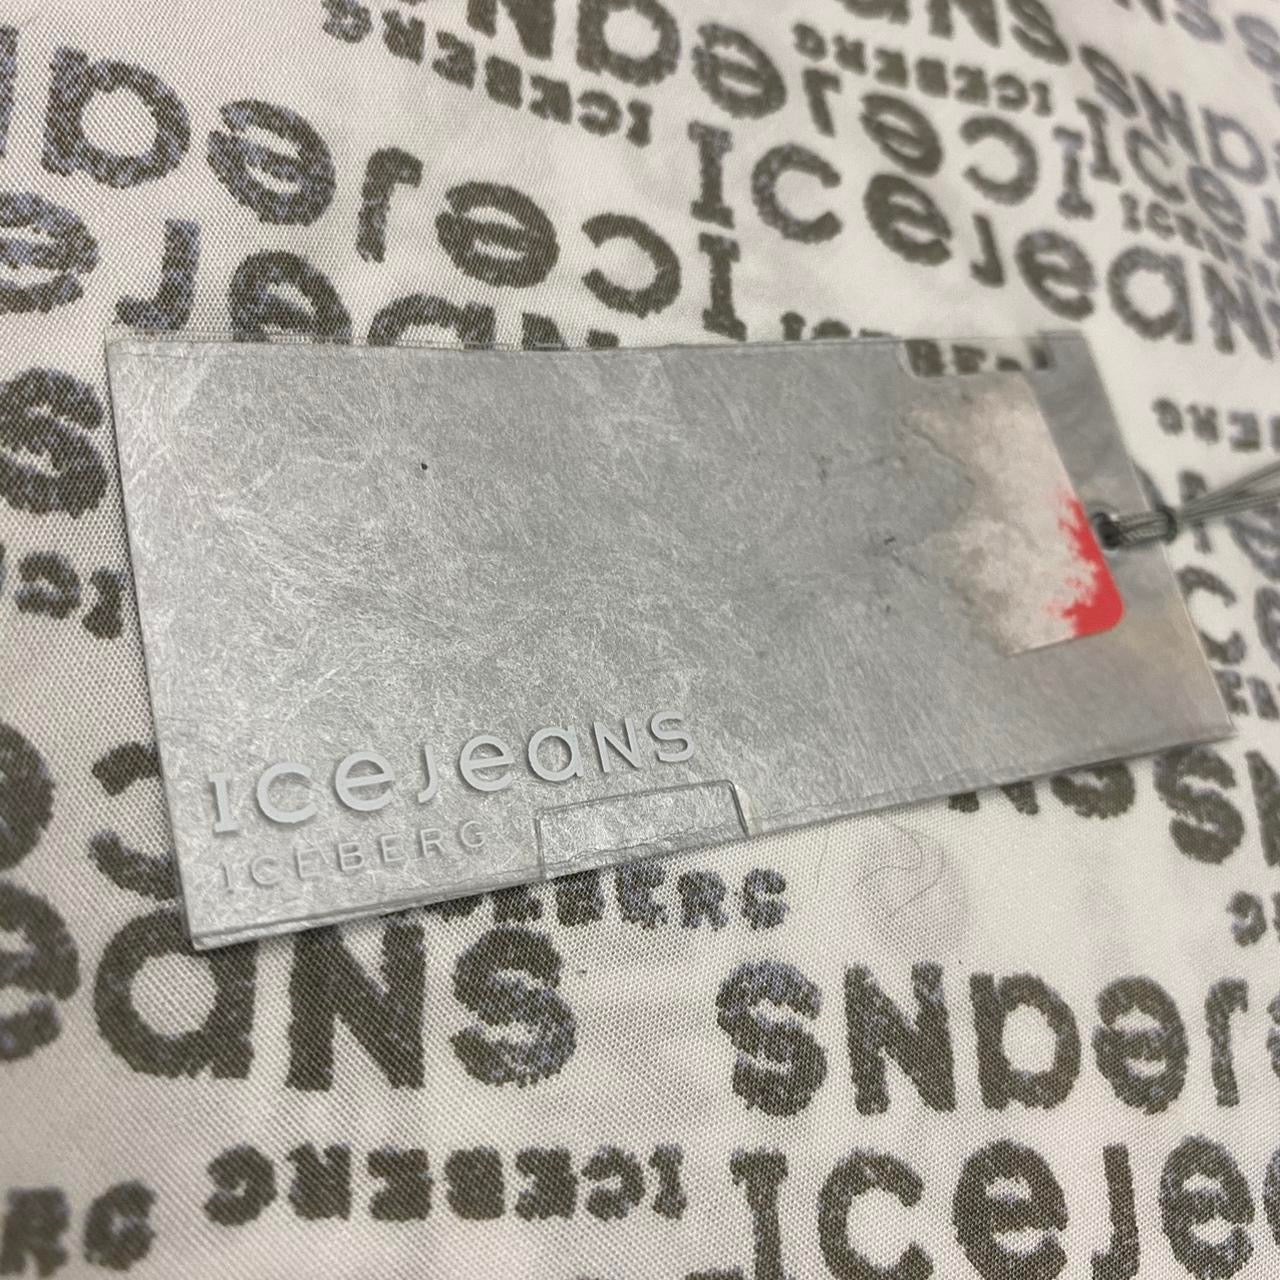 Iceberg Icejeans Fade Shirt DSWT - XL